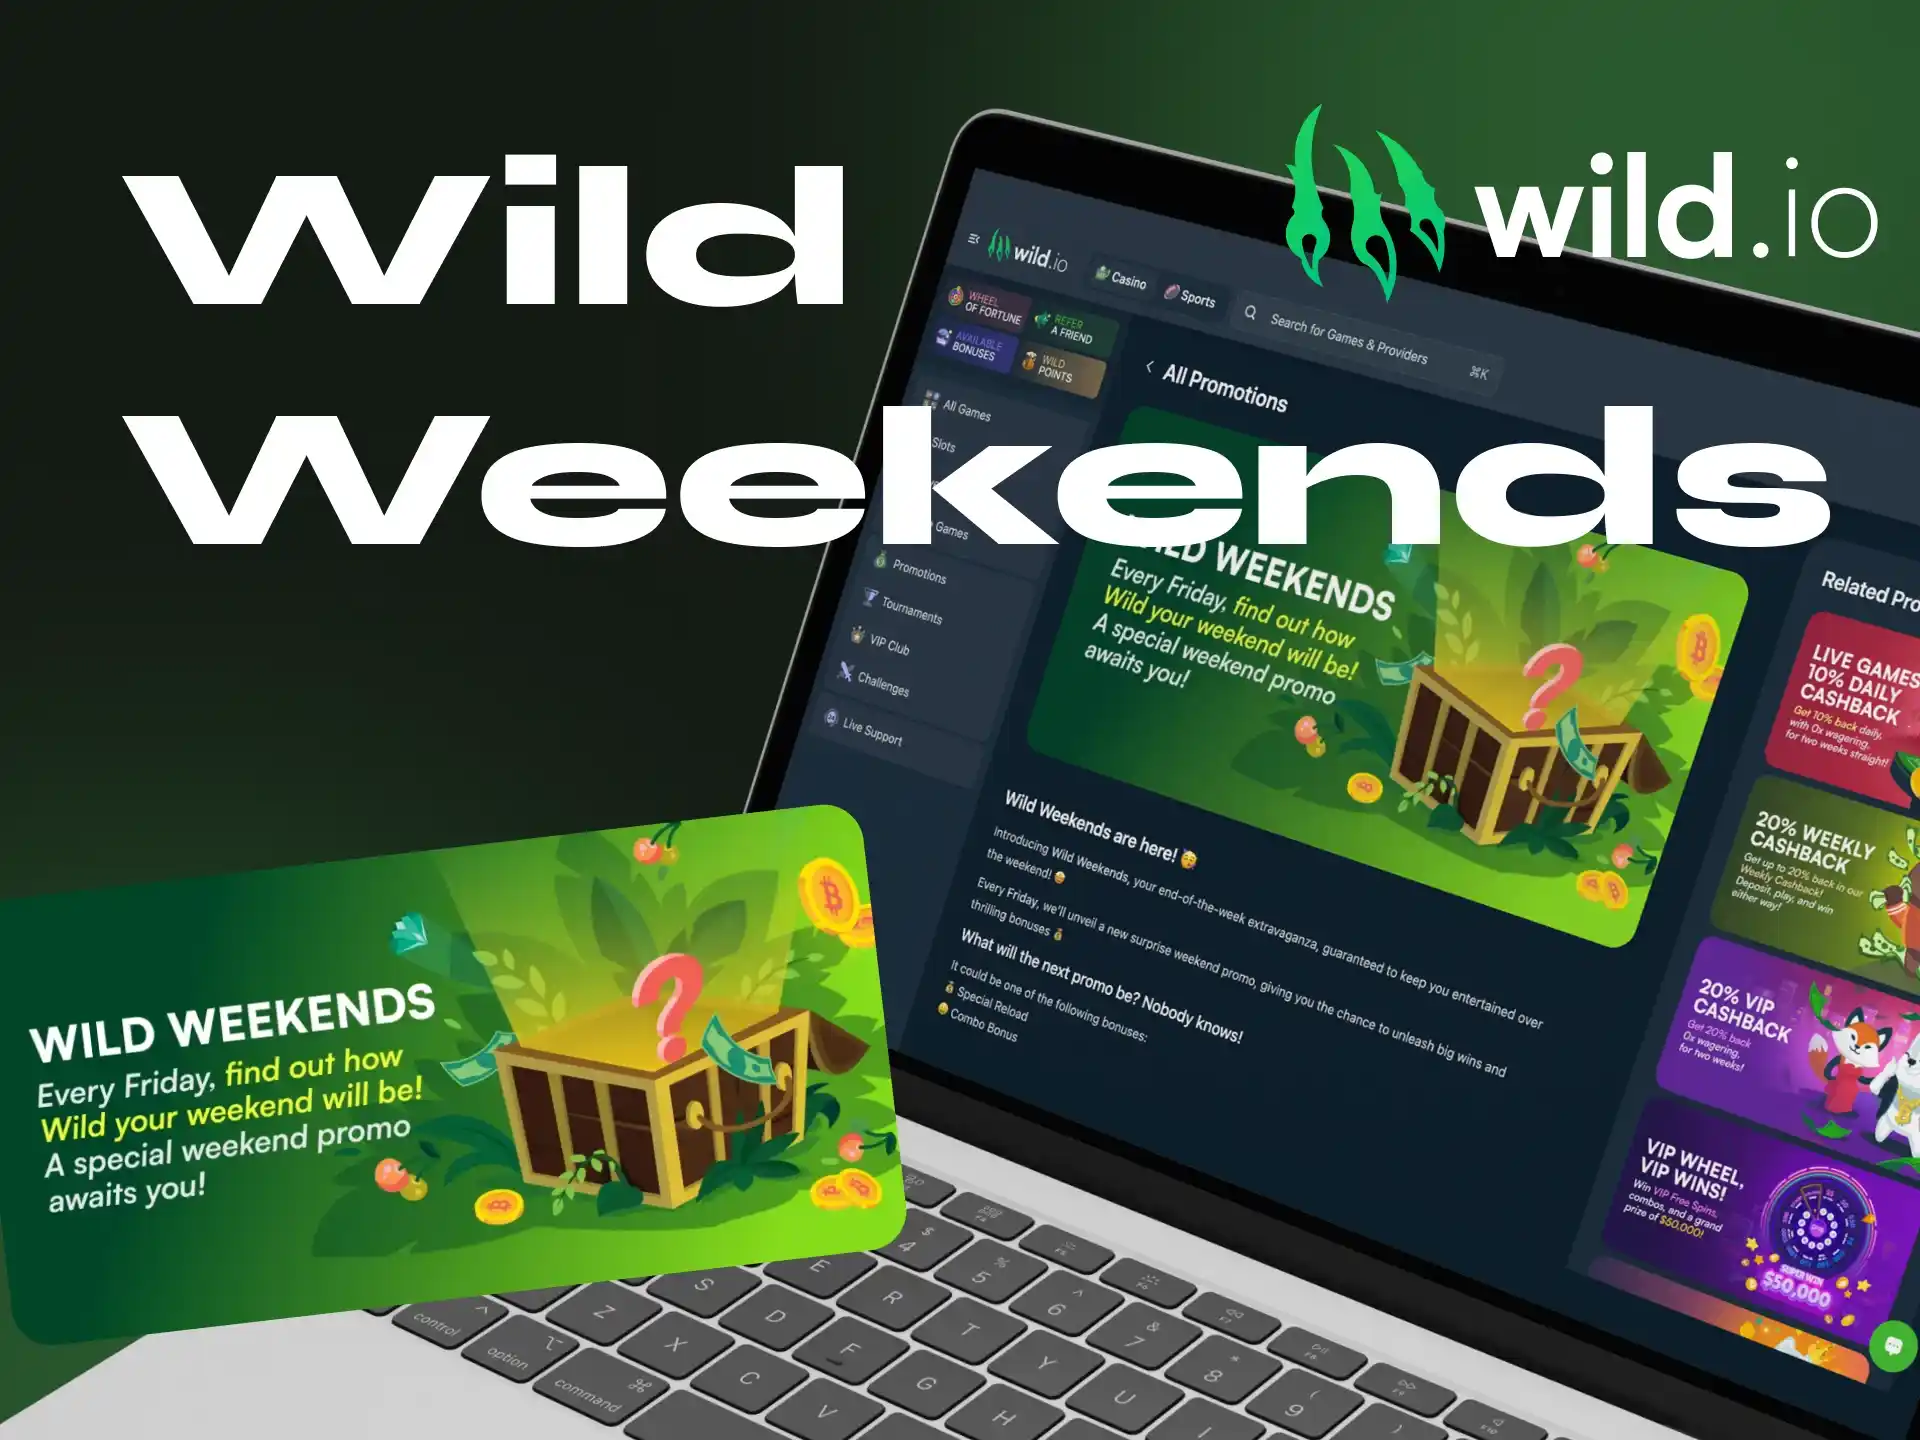 What opportunities does the Wild Weekends bonus give to players at the Wildio online casino.